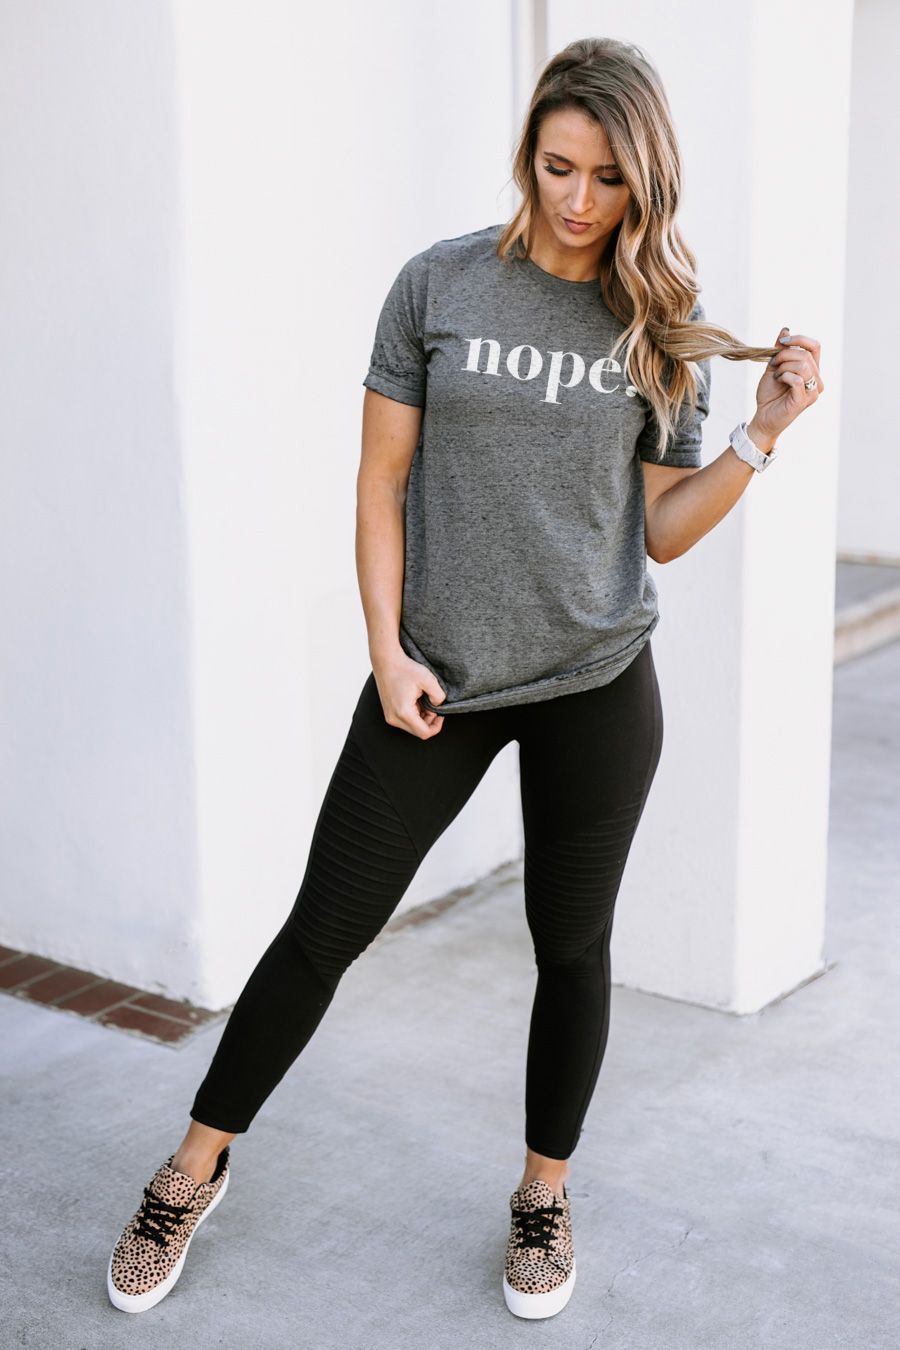 Every Day Outfit- Graphic Tee - Every Day Outfit- Graphic Tee -   18 fitness Outfits casual ideas